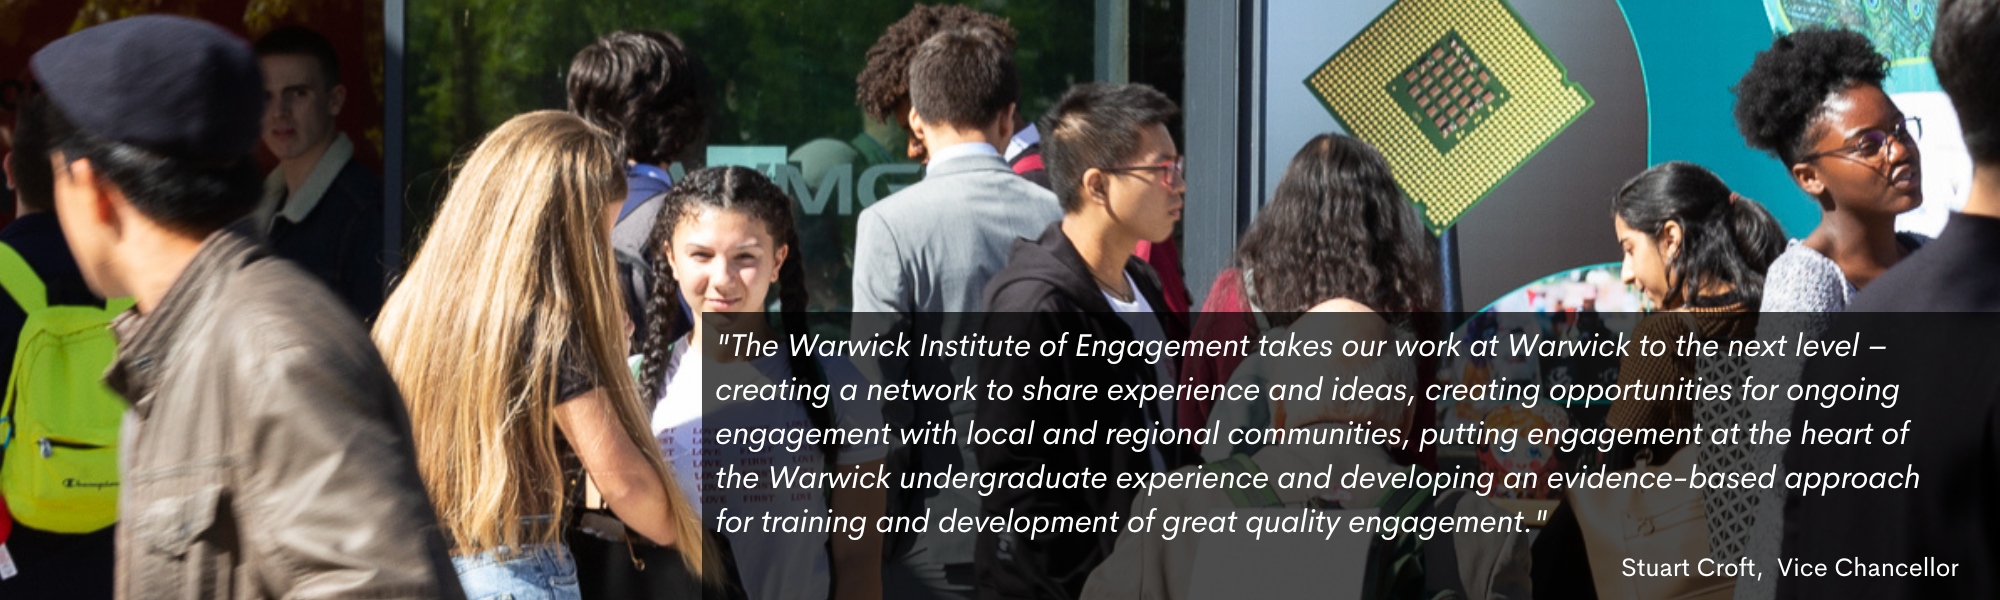 Quote against an event image, saying: "The Warwick Institute of Engagement takes our work at Warwick to the next level – creating a network to share experience and ideas, creating opportunities for ongoing engagement with local and regional communities, putting engagement at the heart of the Warwick undergraduate experience and developing an evidence-based approach for training and development of great quality engagement." by Stuart Croft